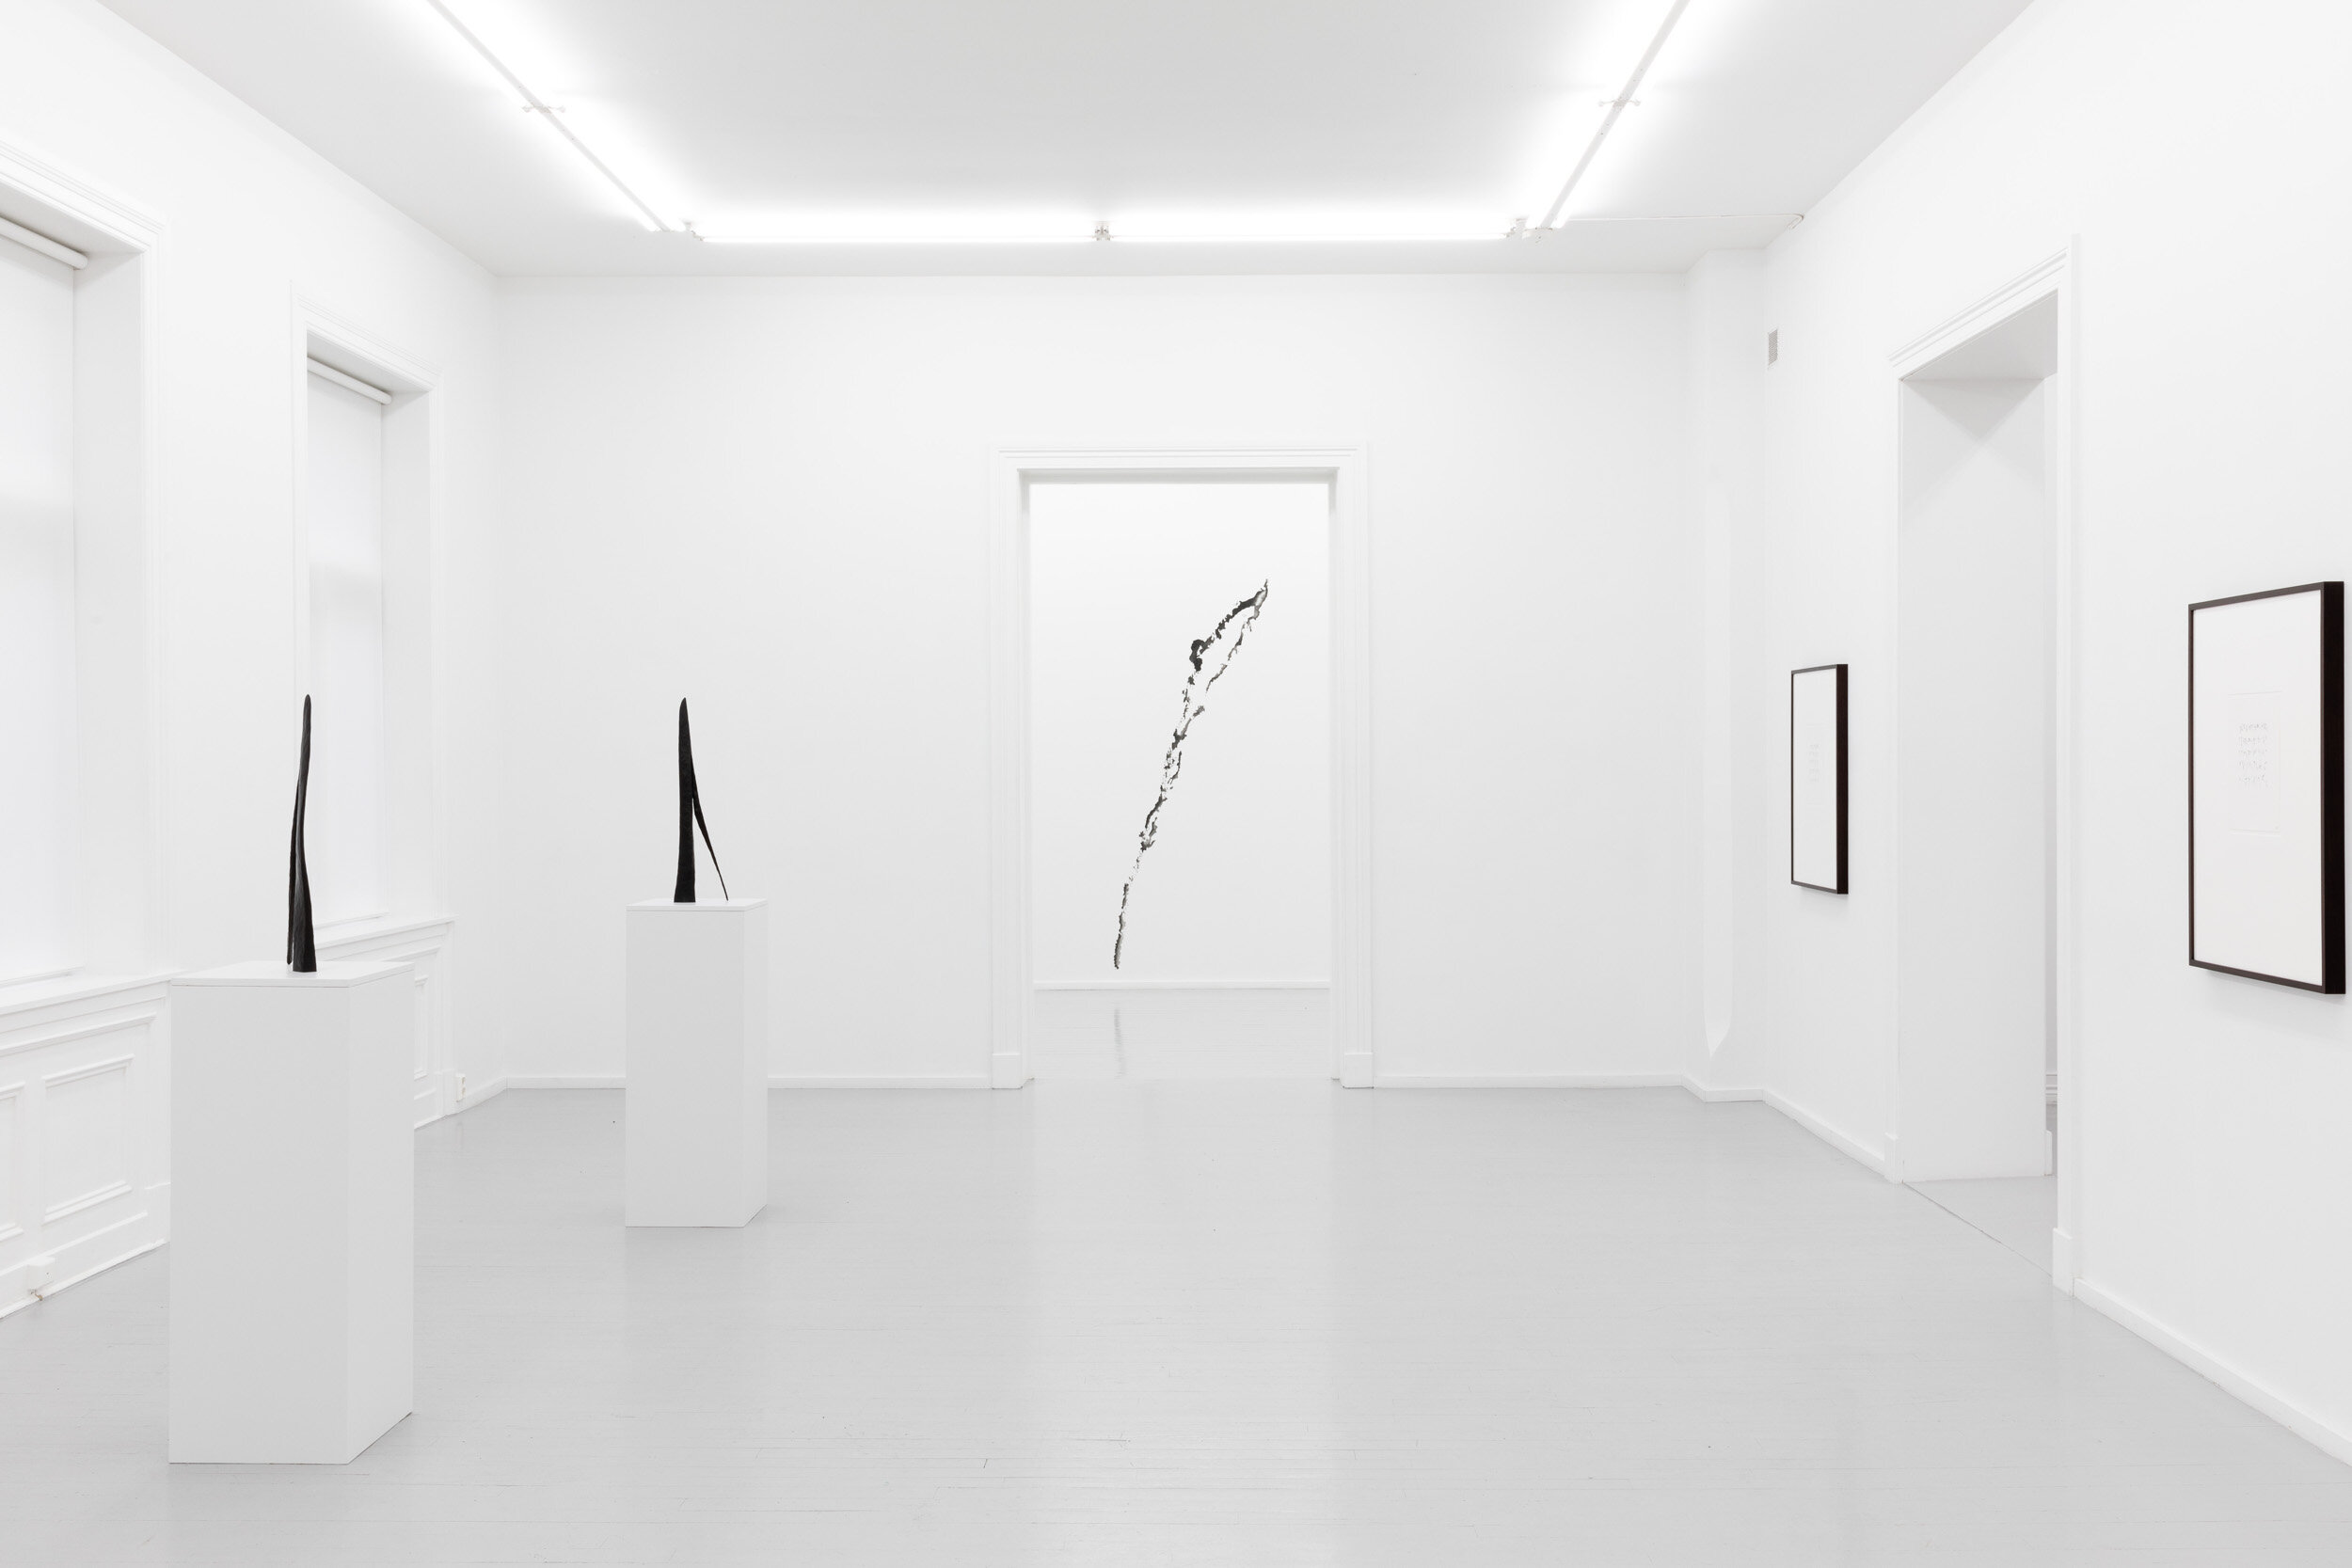  Installation view, Jan Groth ‘Signs and Figures’, Galleri Riis, Oslo 2019. Photographer: Adrian Bugge 